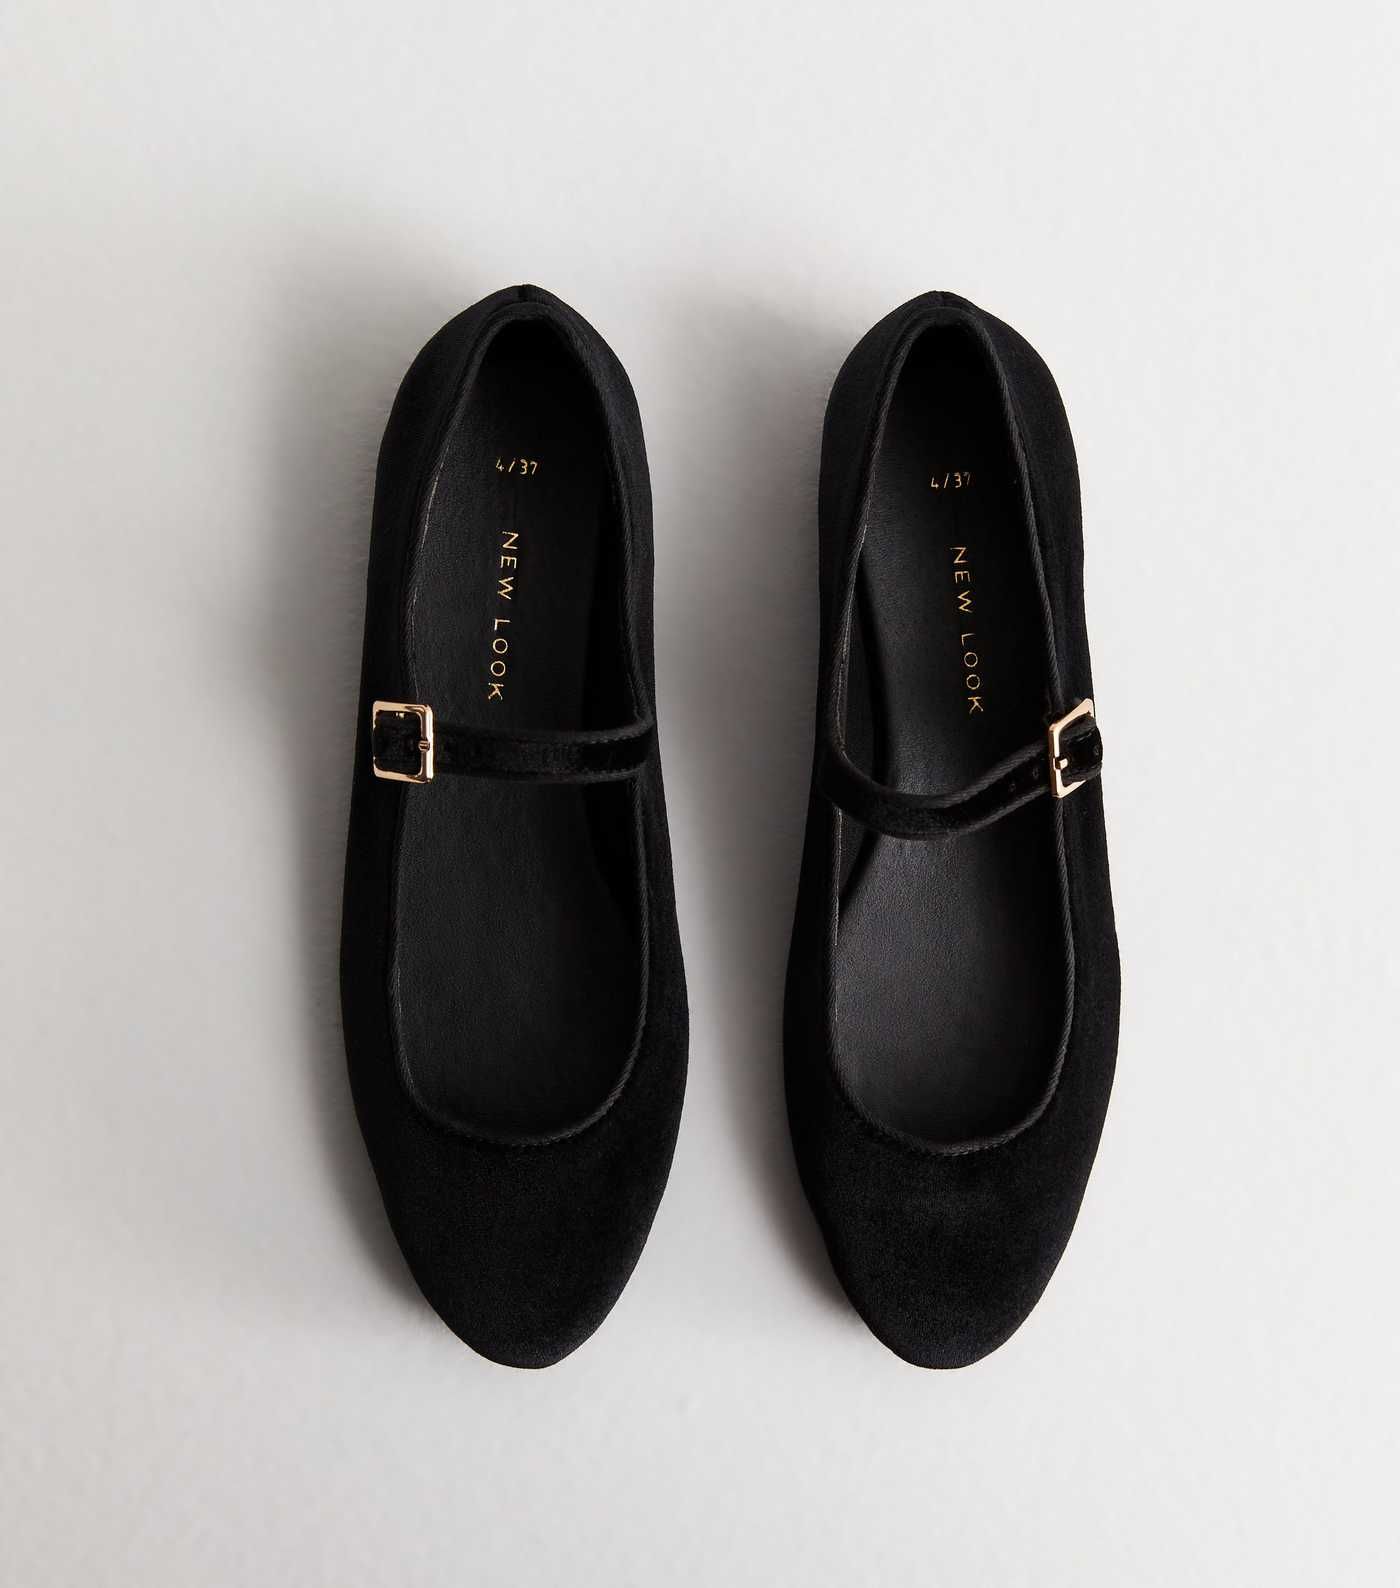 Black Velvet Strappy Ballerina Pumps
						
						Add to Saved Items
						Remove from Saved Item... | New Look (UK)